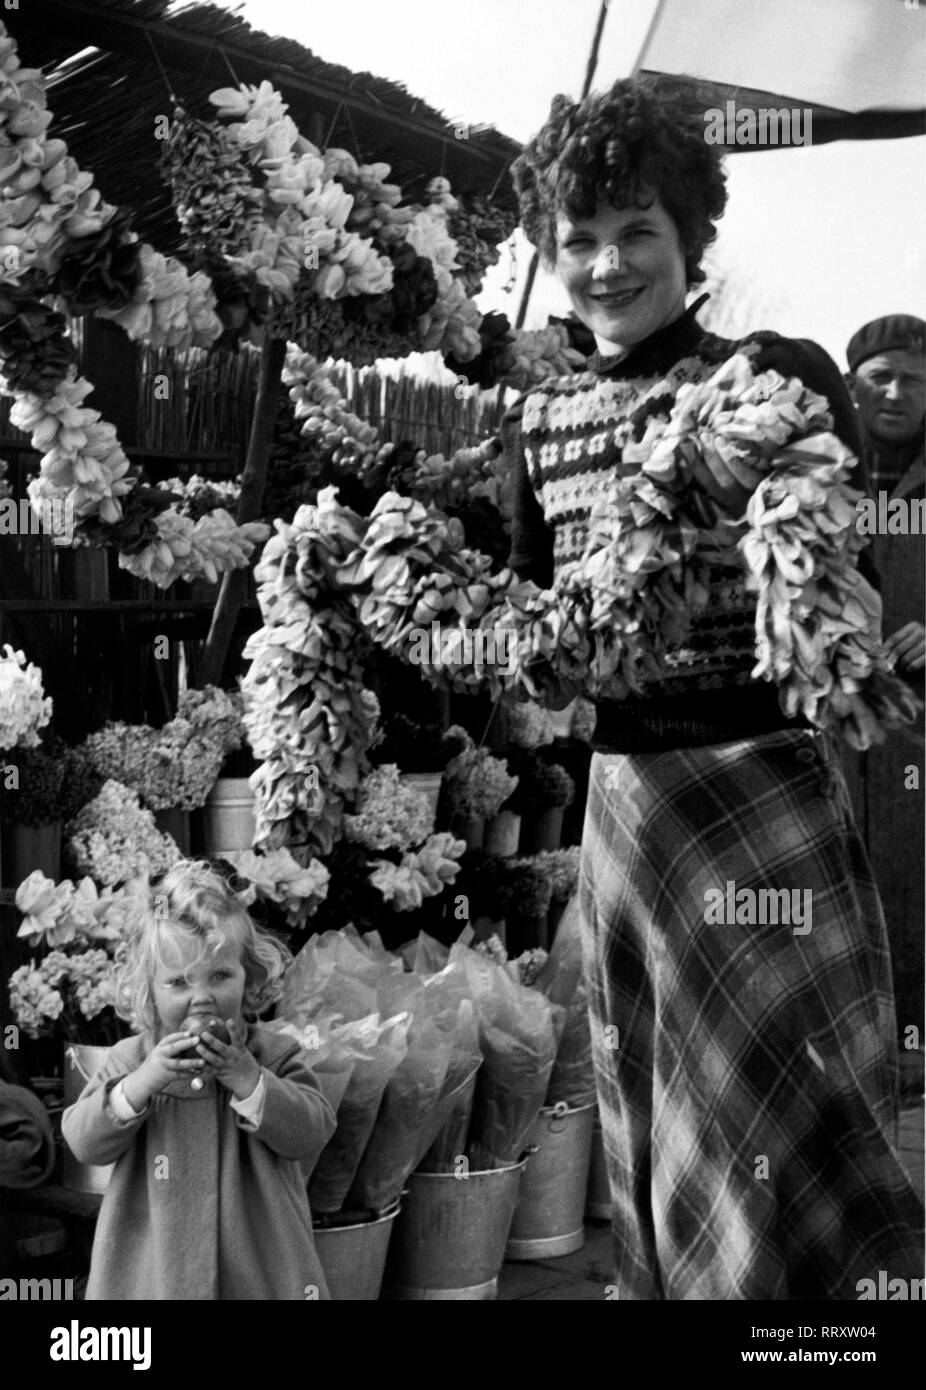 Travel to Holland - Holland, part of the Netherlands - woman selling garlands and flowers. Blumenverkäuferin in den Niederlanden. Image date circa 1956. Photo Erich Andres Stock Photo